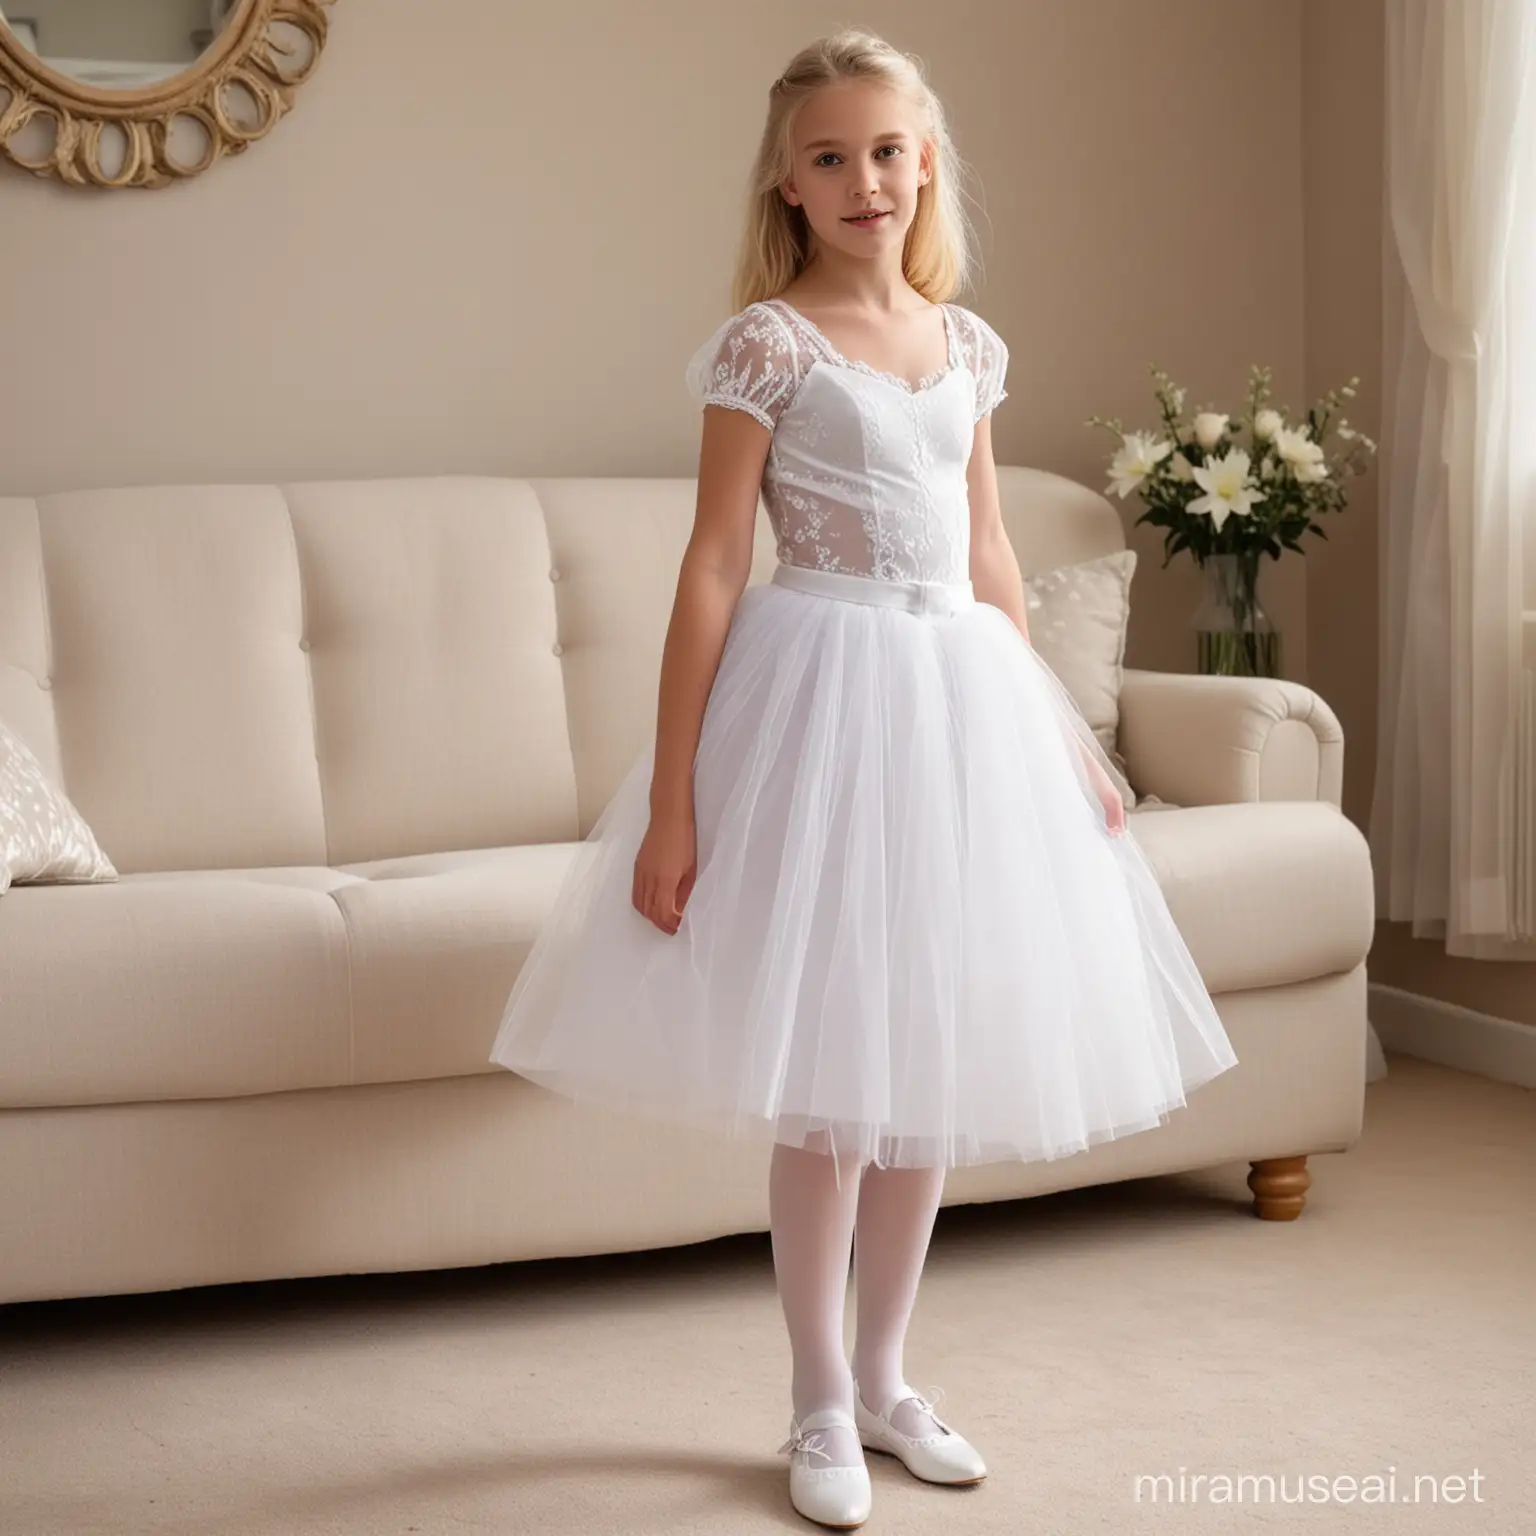 11 year old busty thin blonde  girl in semi transparent communion lacy ultra short tight ball  gown dress white stockings white shoes  in living room side view